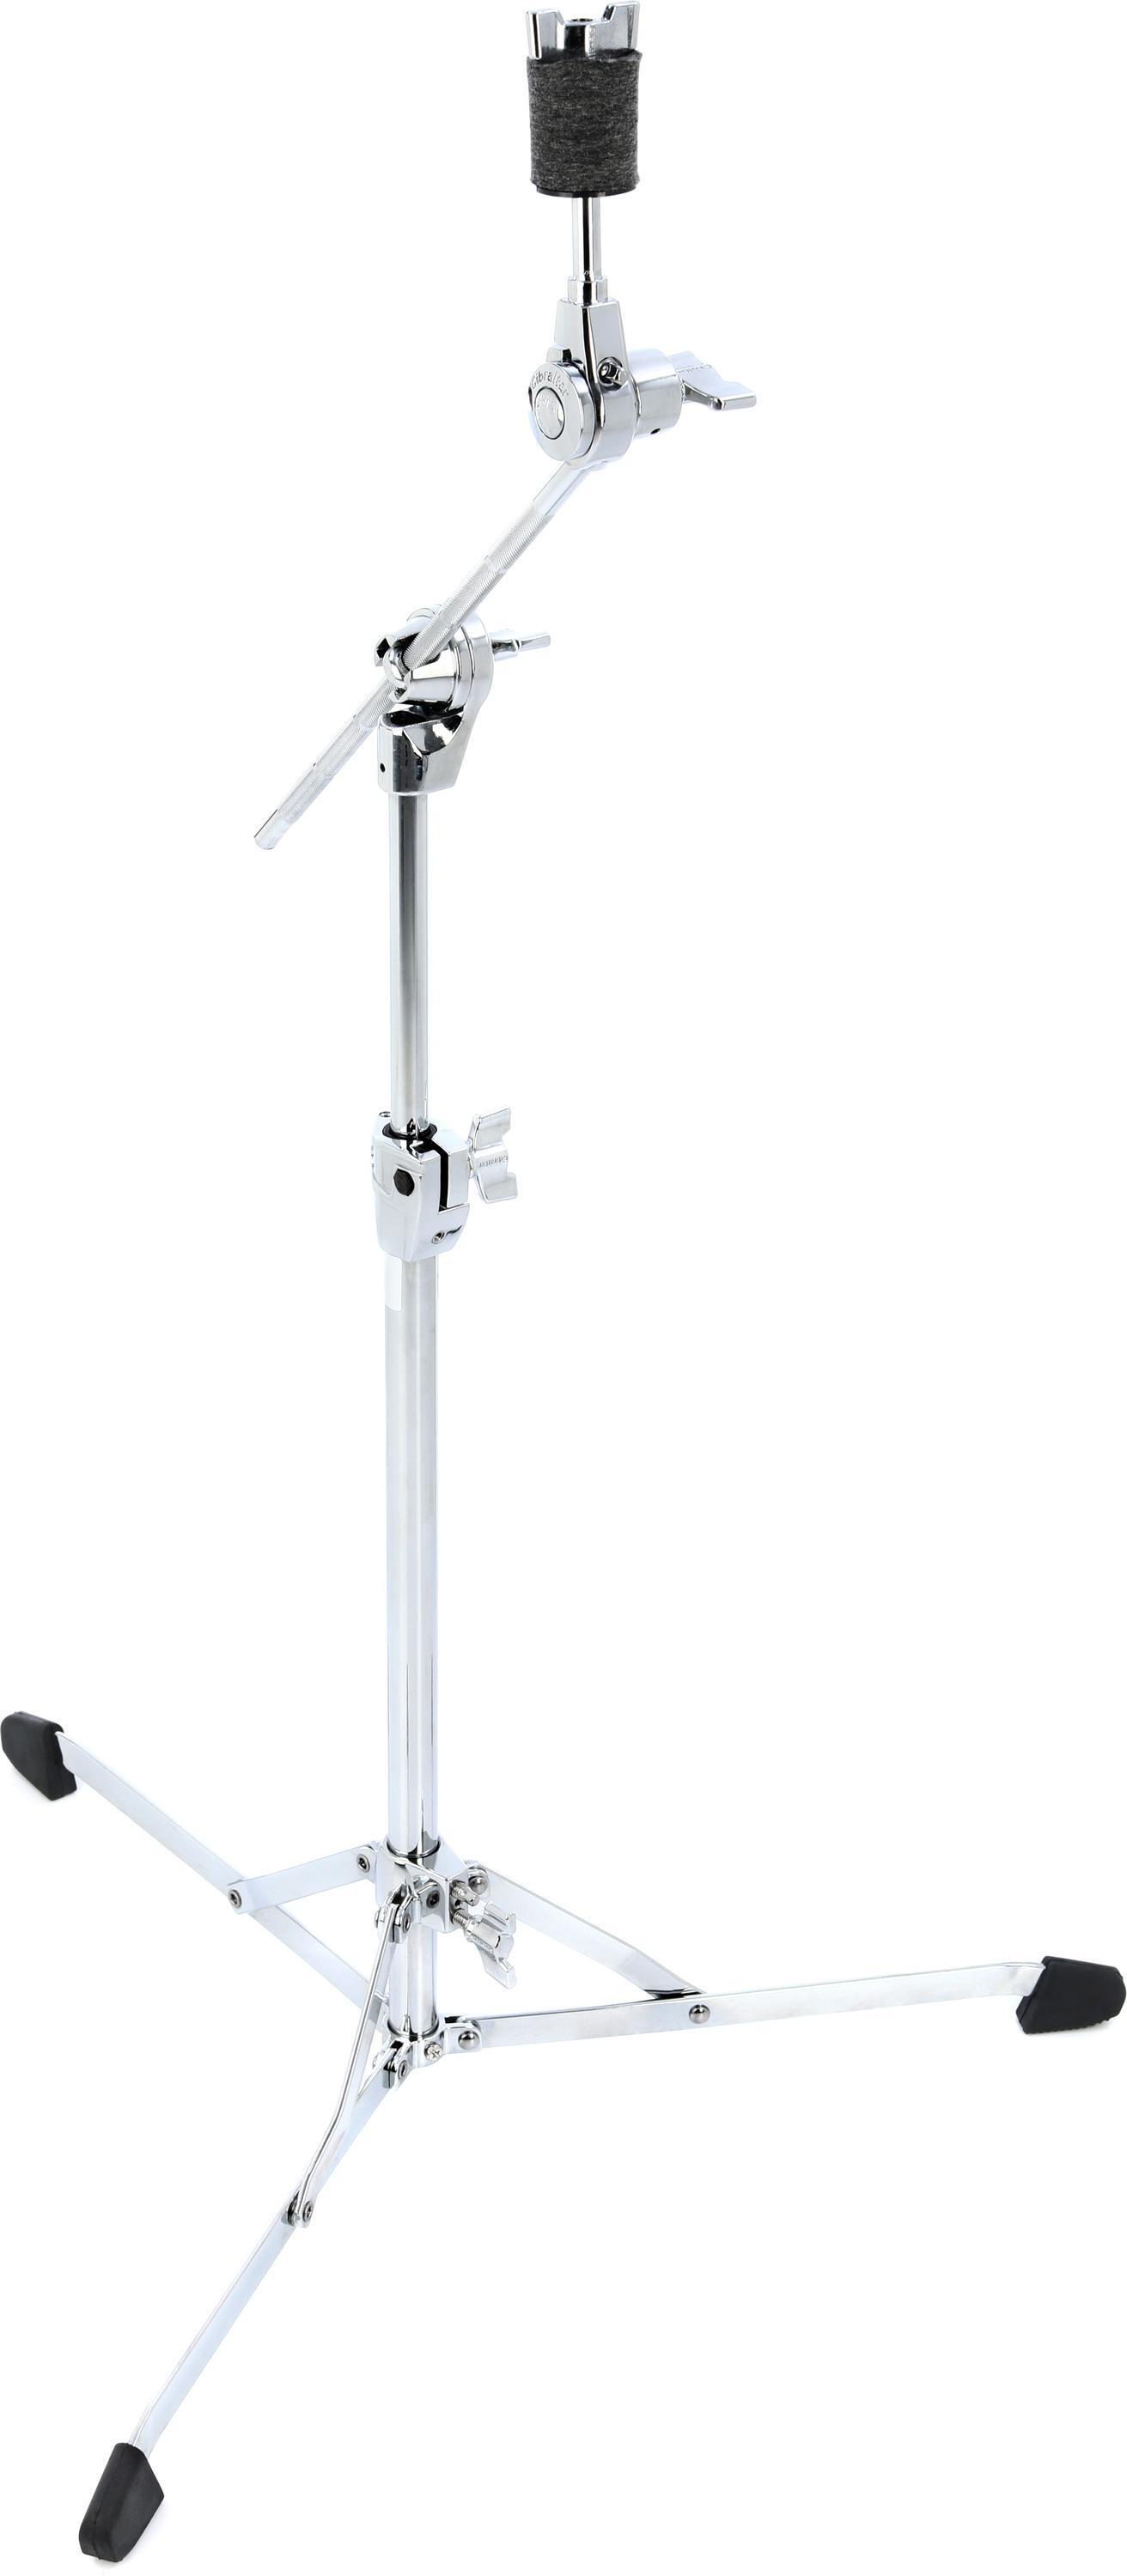 Gibraltar 8709 8000 Series Flat Base Boom Cymbal Stand | Sweetwater